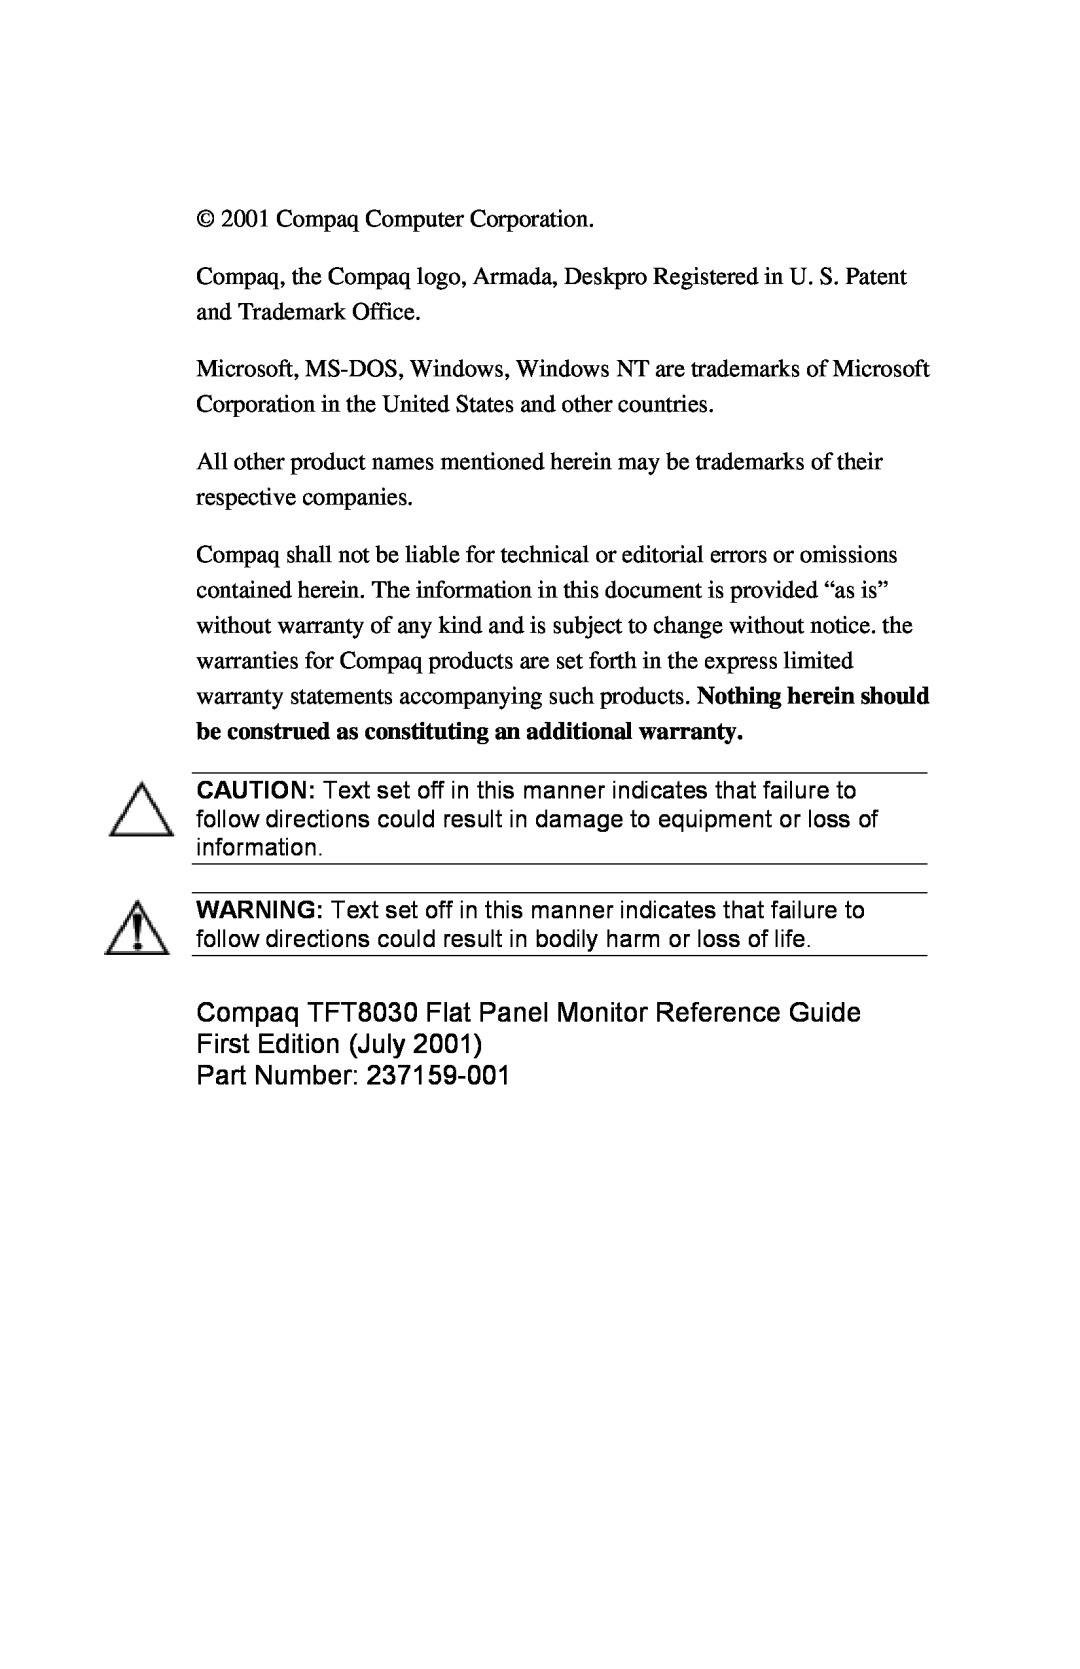 Compaq manual Compaq TFT8030 Flat Panel Monitor Reference Guide First Edition July, Part Number 